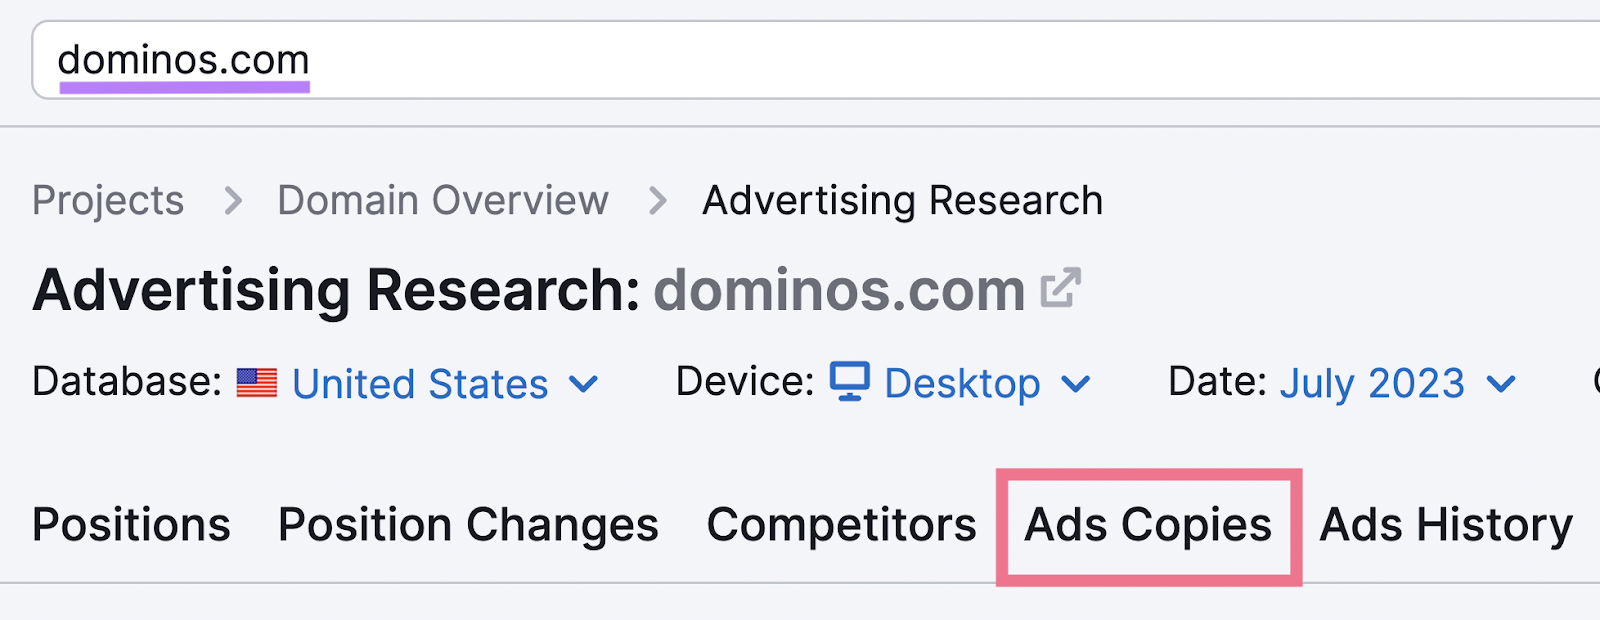 an example of sear،g for "dominos.com" in the “Ads Copies” tab in the Advertising Research tool